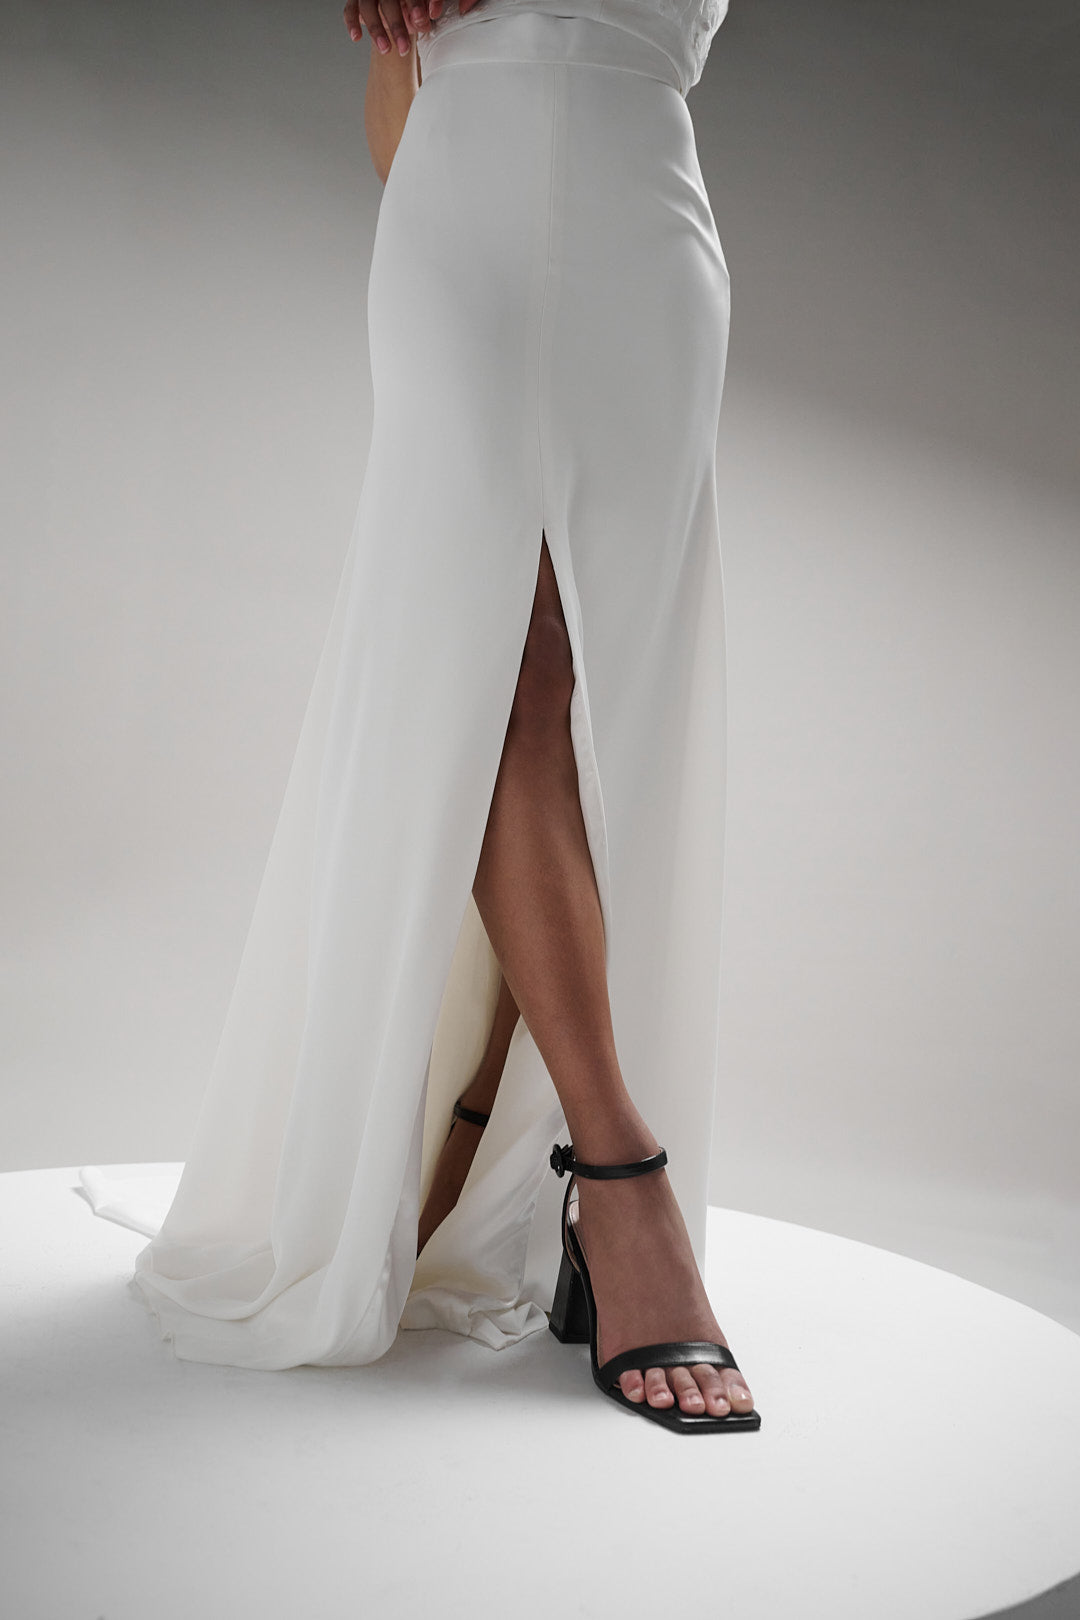 Flattering long crepe skirt with customizable slit side - perfect for modern minimalism